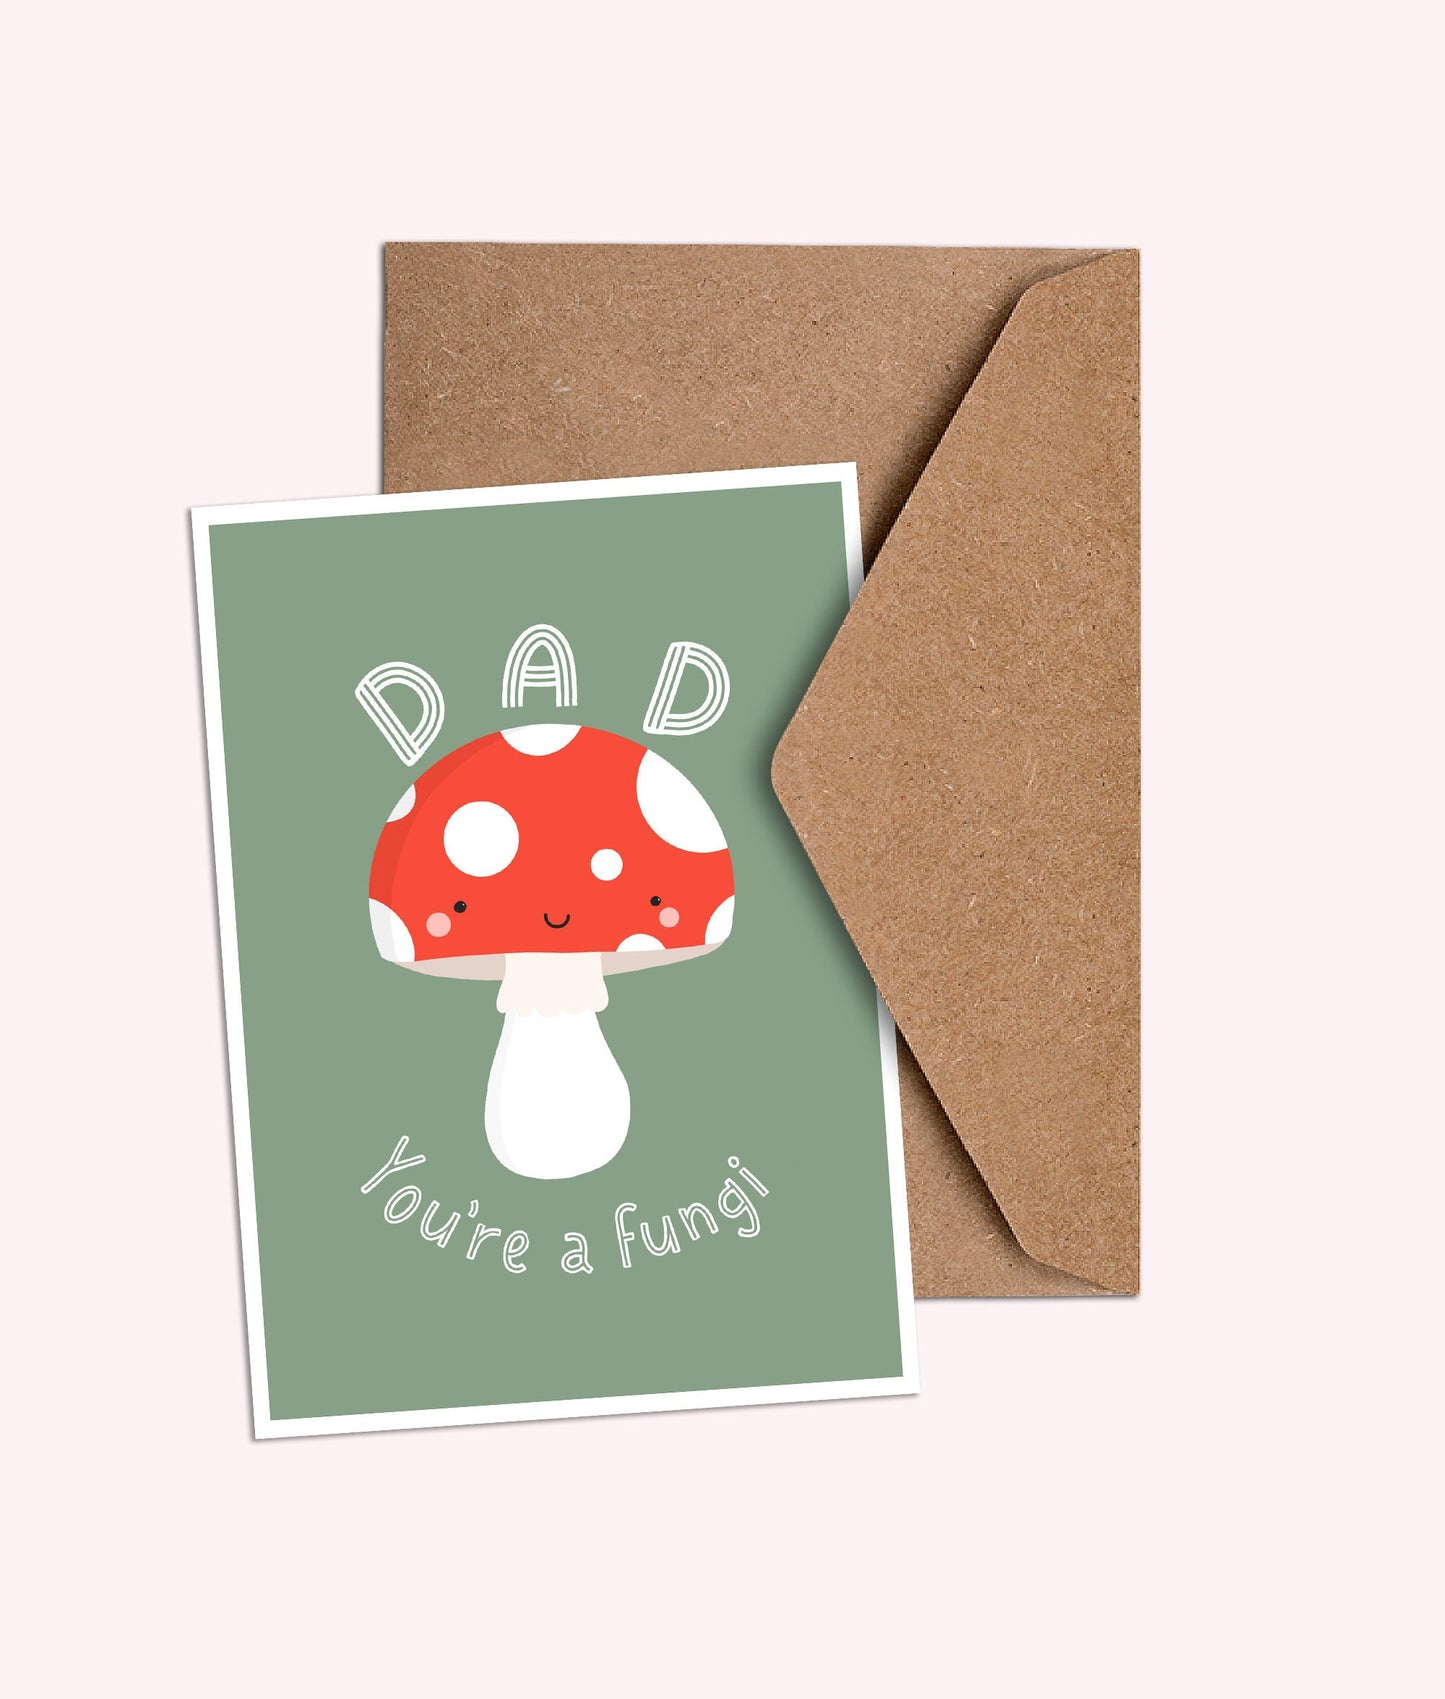 Dad you're a fungi card